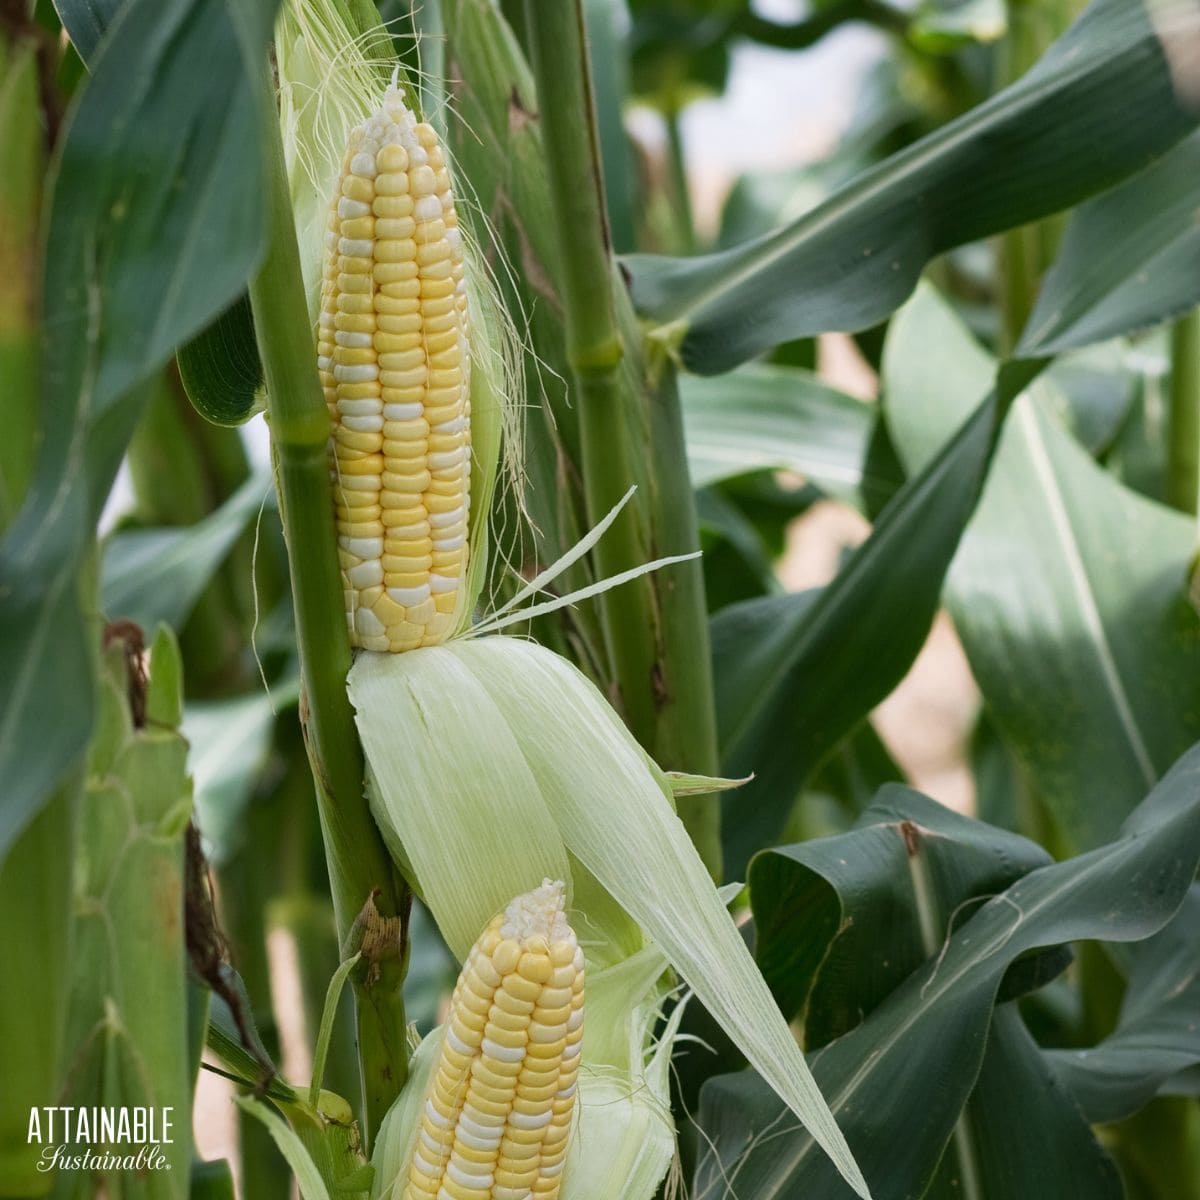 ears of corn on a plant, yellow kernels visible.